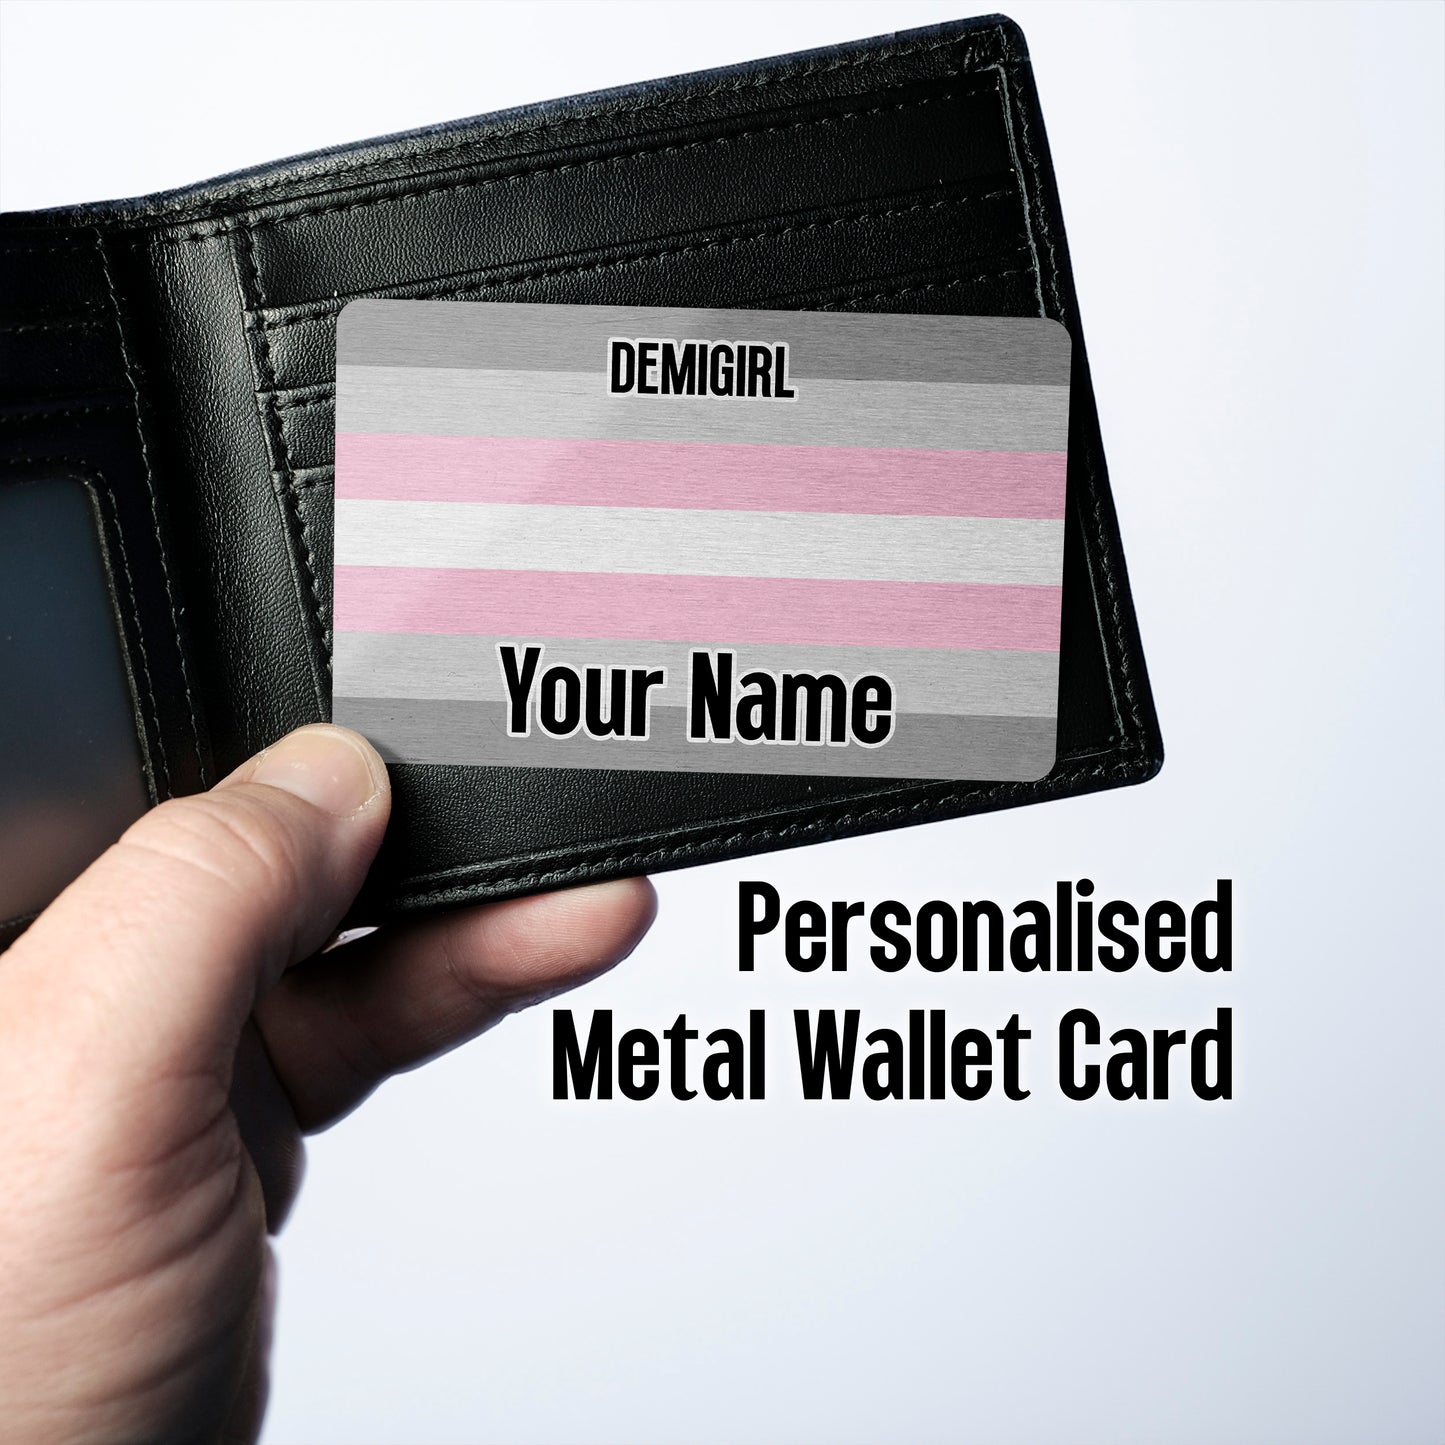 Aluminium wallet card personalised with your name and the demigirl pride flag